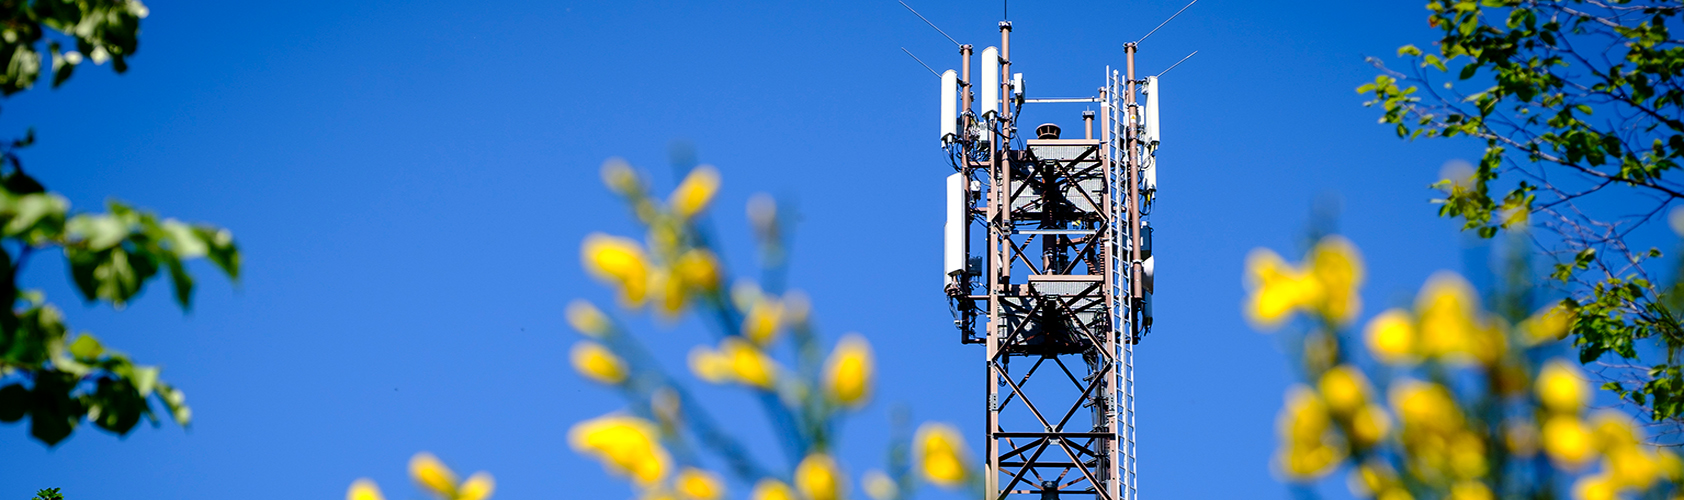 Steel-grid mast supplies rural area with mobile communications